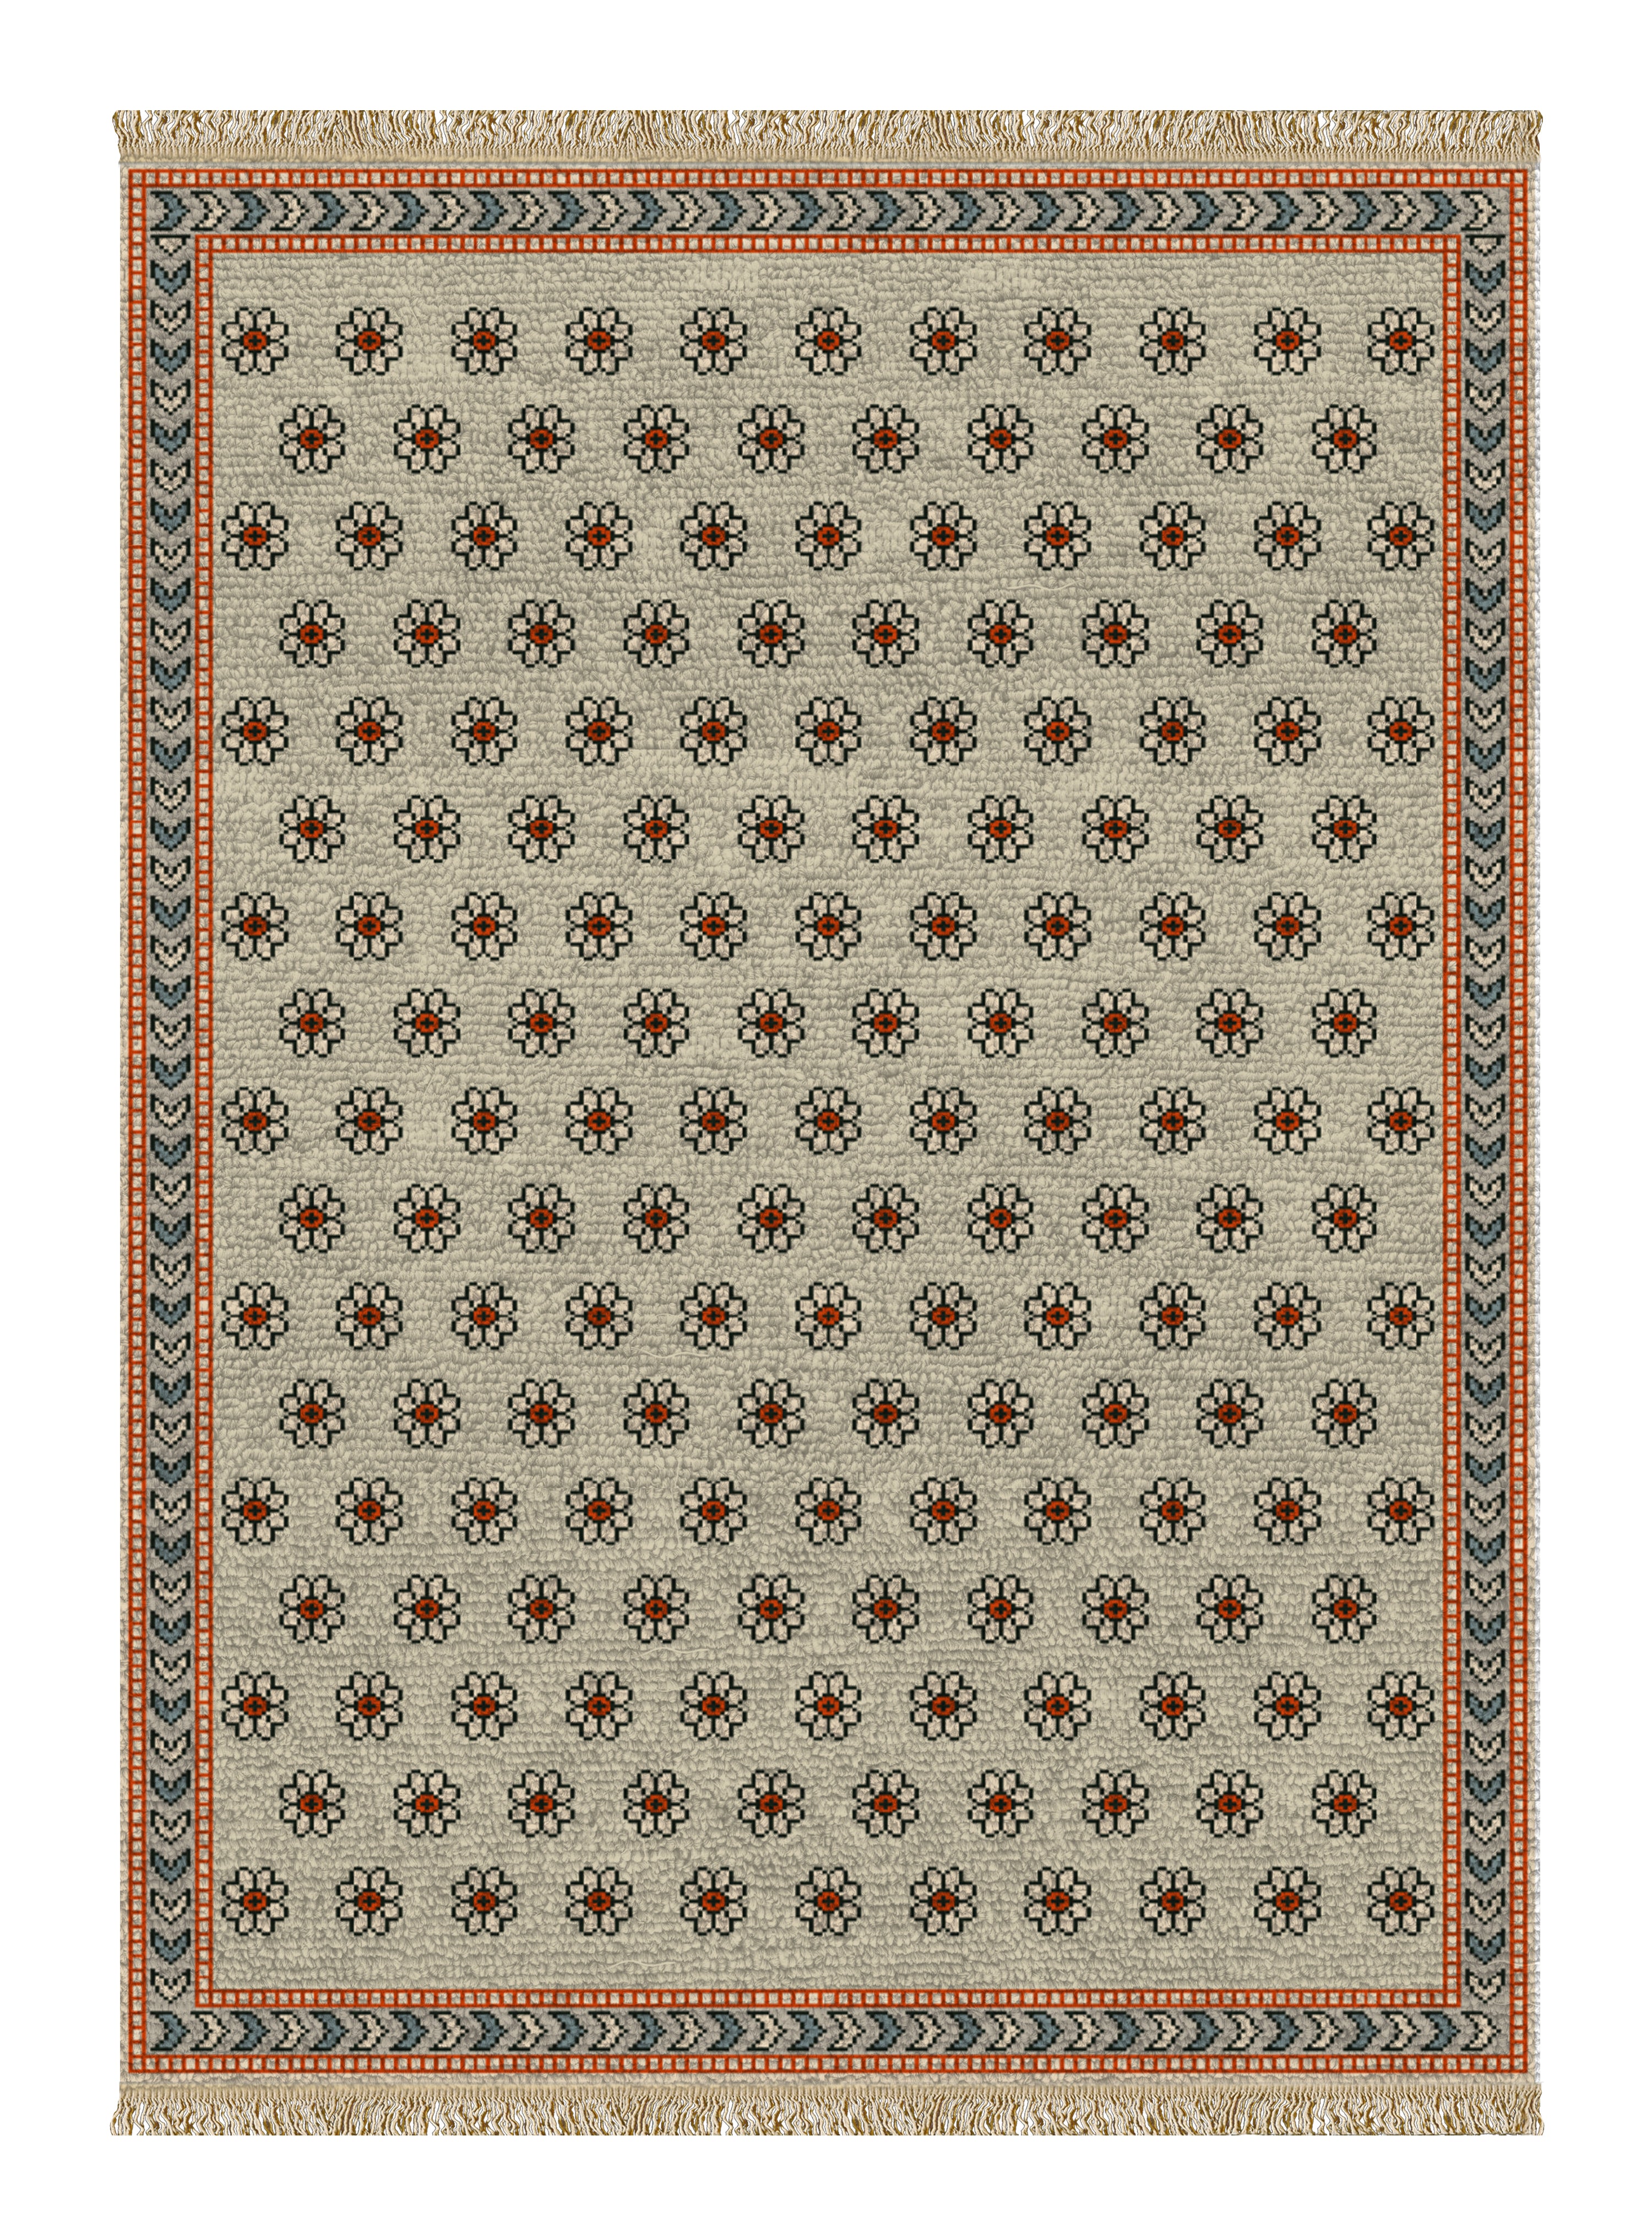 Dede Hand-Knotted Wool Area Rug by Kevin Francis Design | Atlanta Interior Designer | Luxury Home Decor